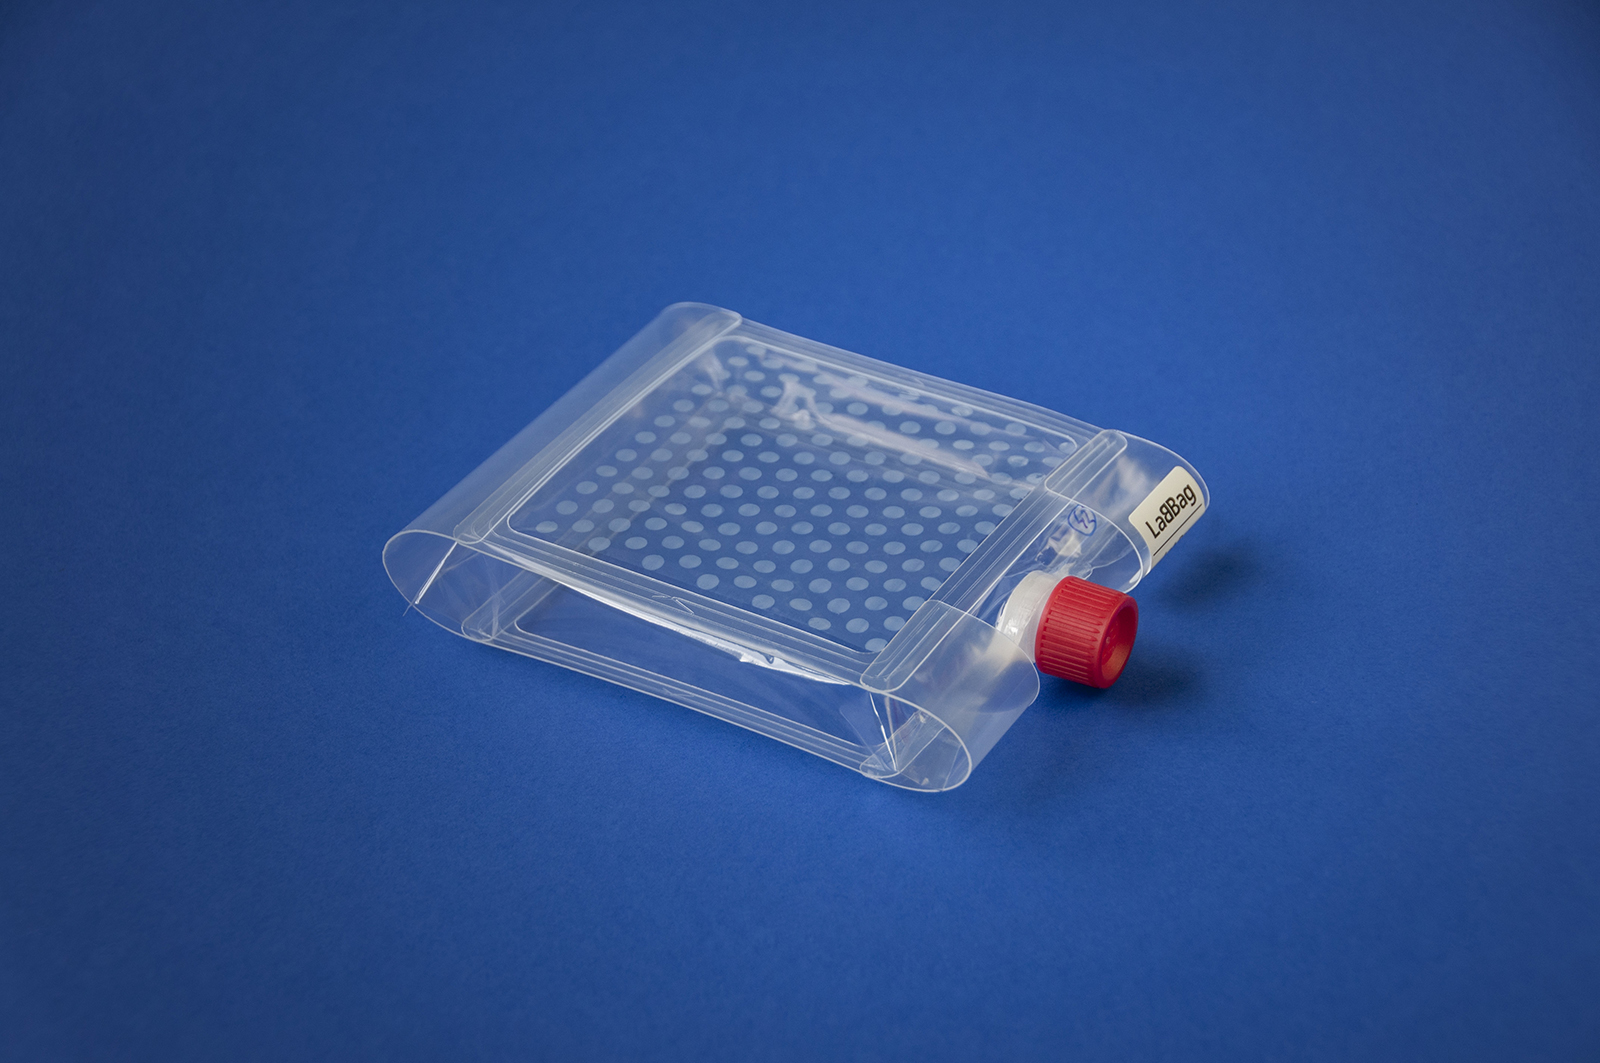 The mini laboratory is 150 mm long, 120 mm wide and 20 mm high. The screw cap is made using 3D printing. Hydrophilic spots are visible on the upper interior surface of the bag. 